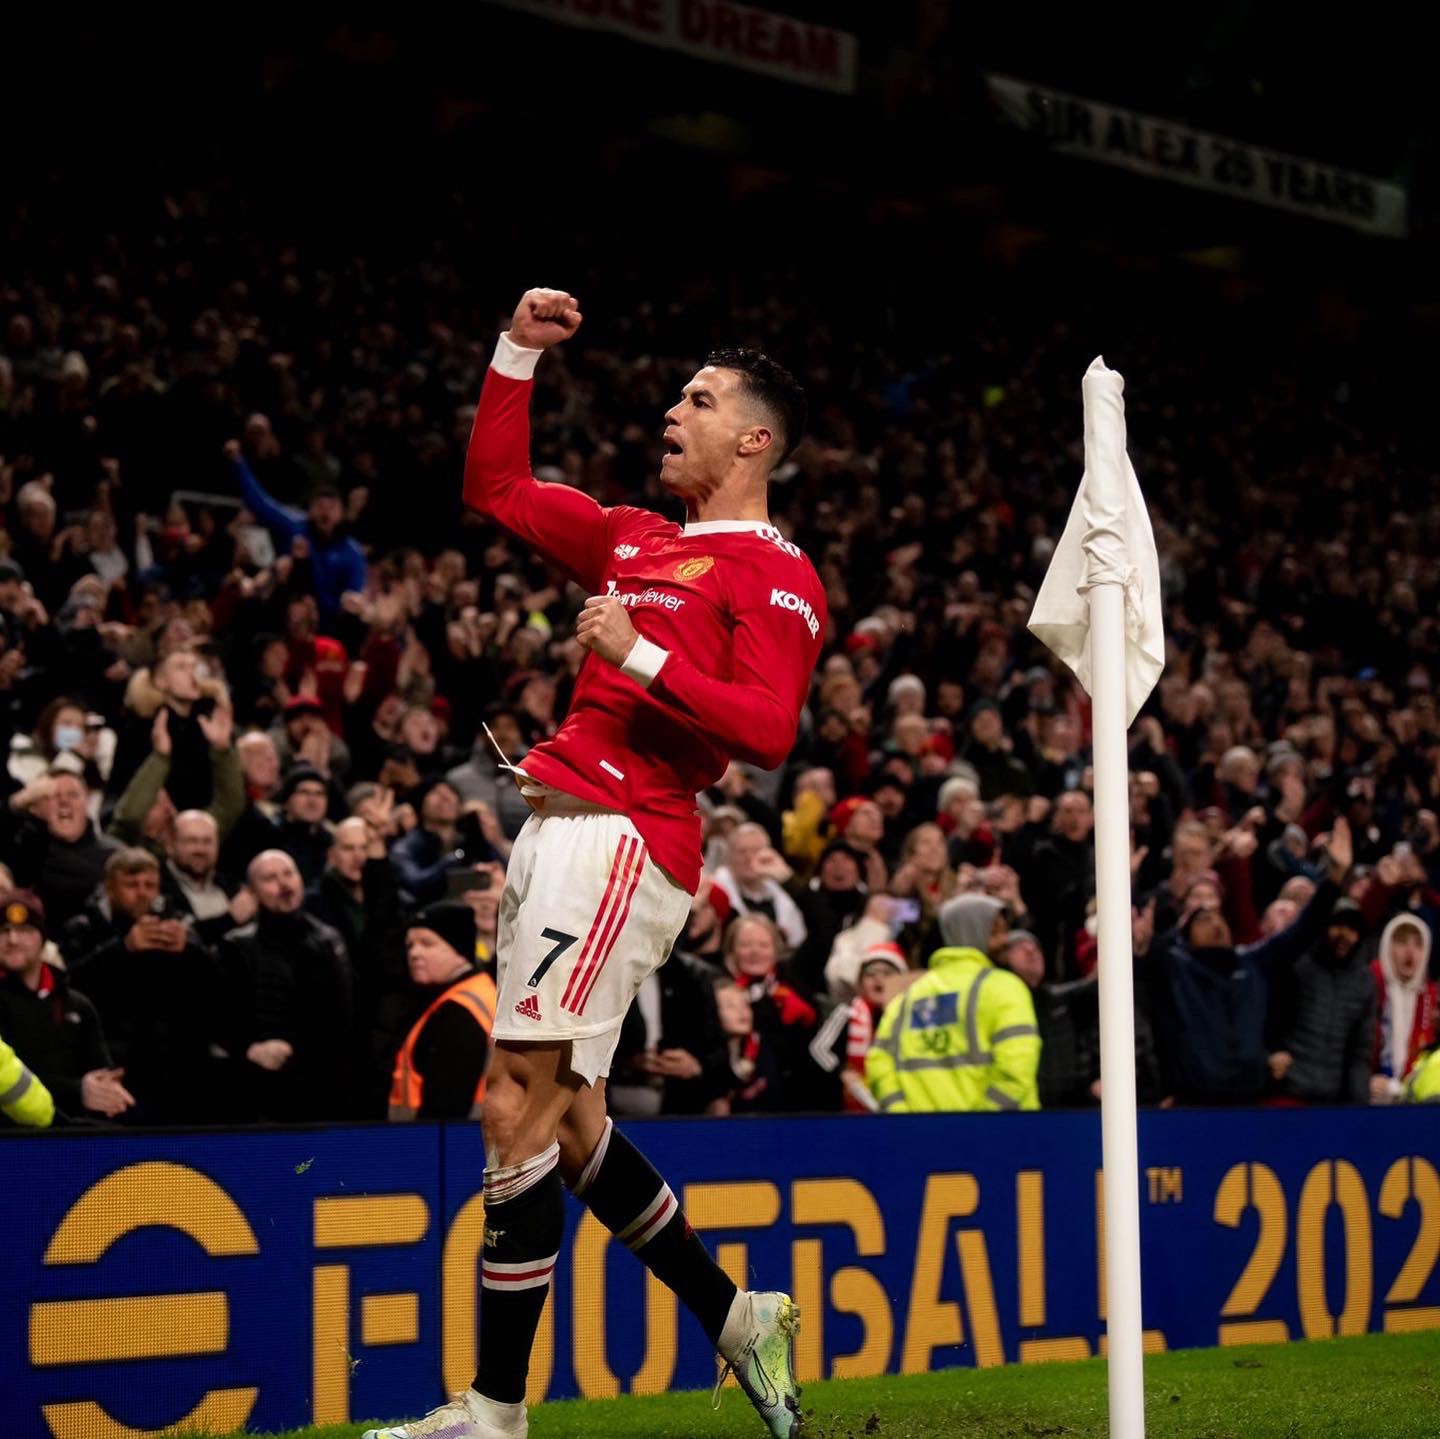 Manchester United 2-0 Brighton Highlights: Cristiano Ronaldo ends his scoring drought with a stunning strike as Man United beat 10 man Brighton